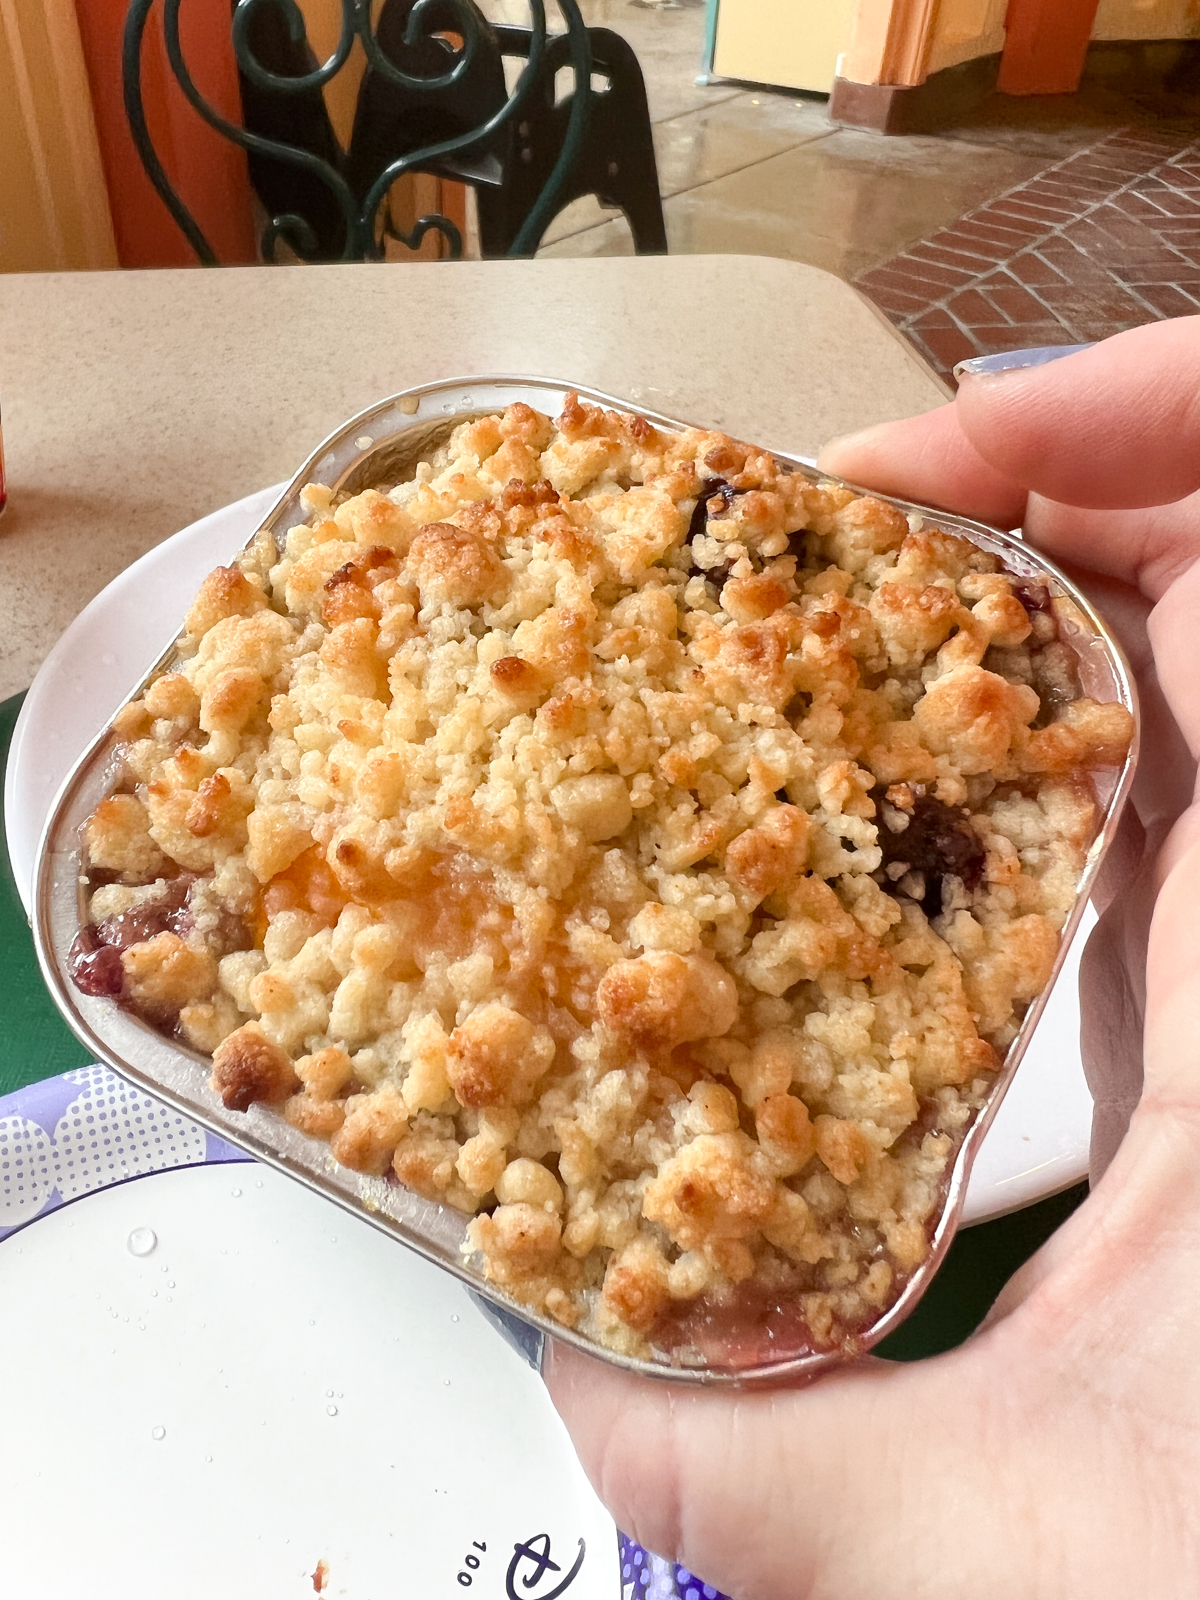 hand holding a blueberry cobbler in a metal dish